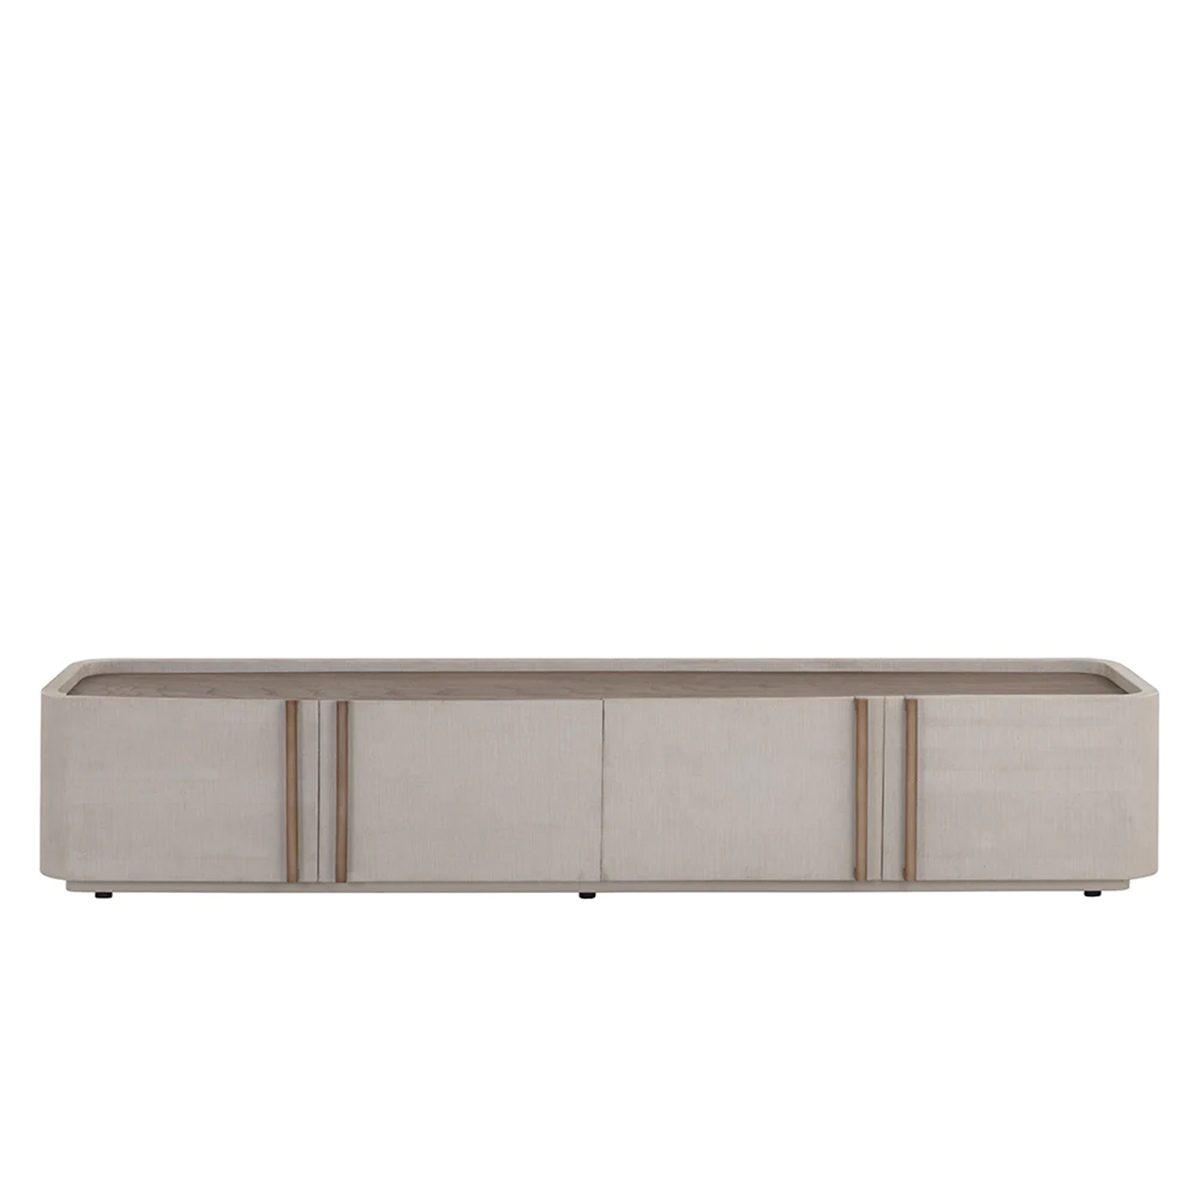 Jamille Media Console and Cabinet by Sunpan 2